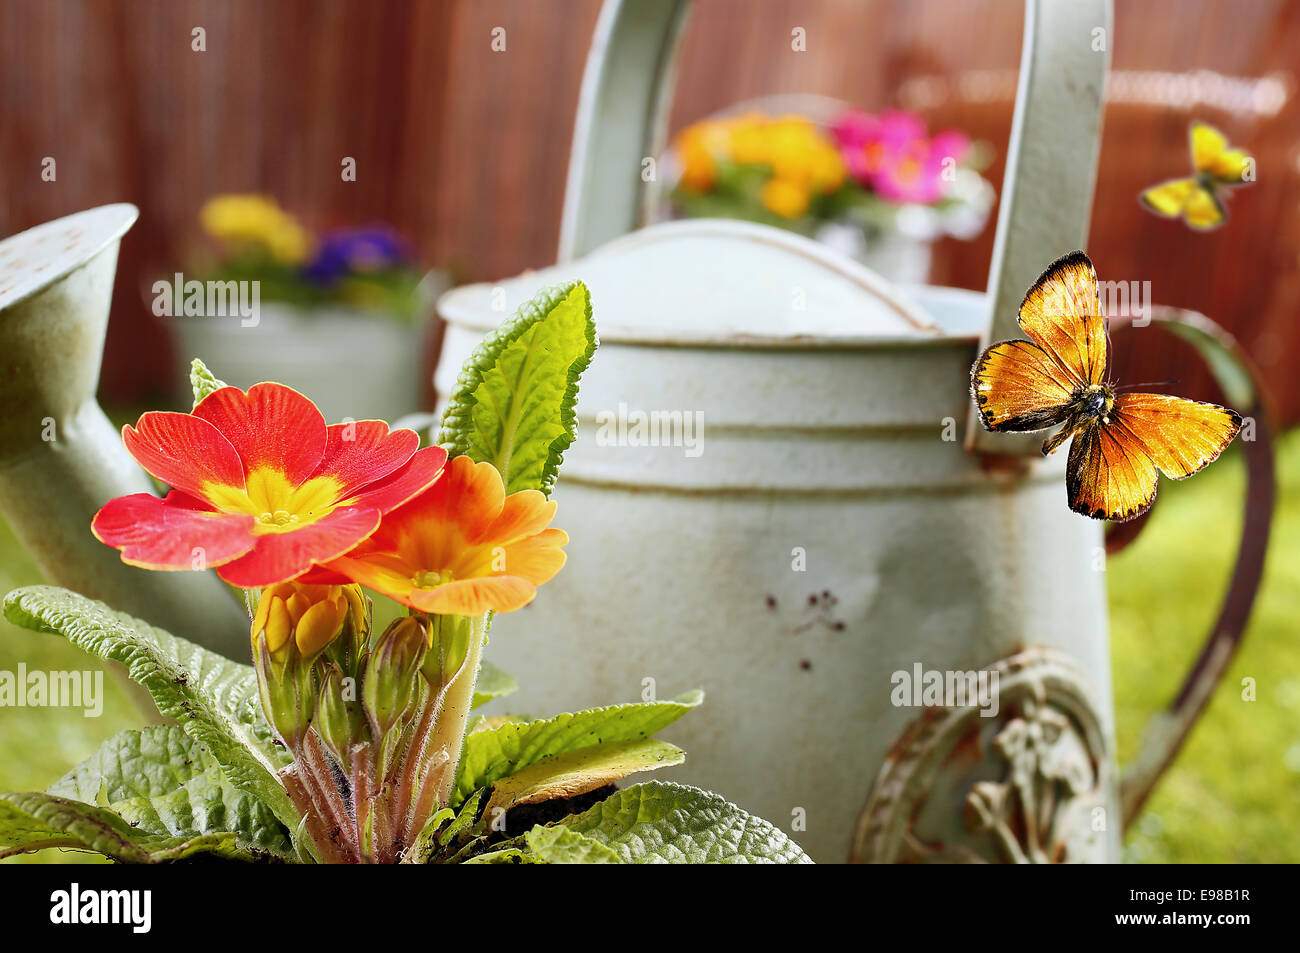 Conceptual image of a summer country garden with an old retro metal watering can, vivid orange ornamental flowers and flying butterflies with shallow dof Stock Photo